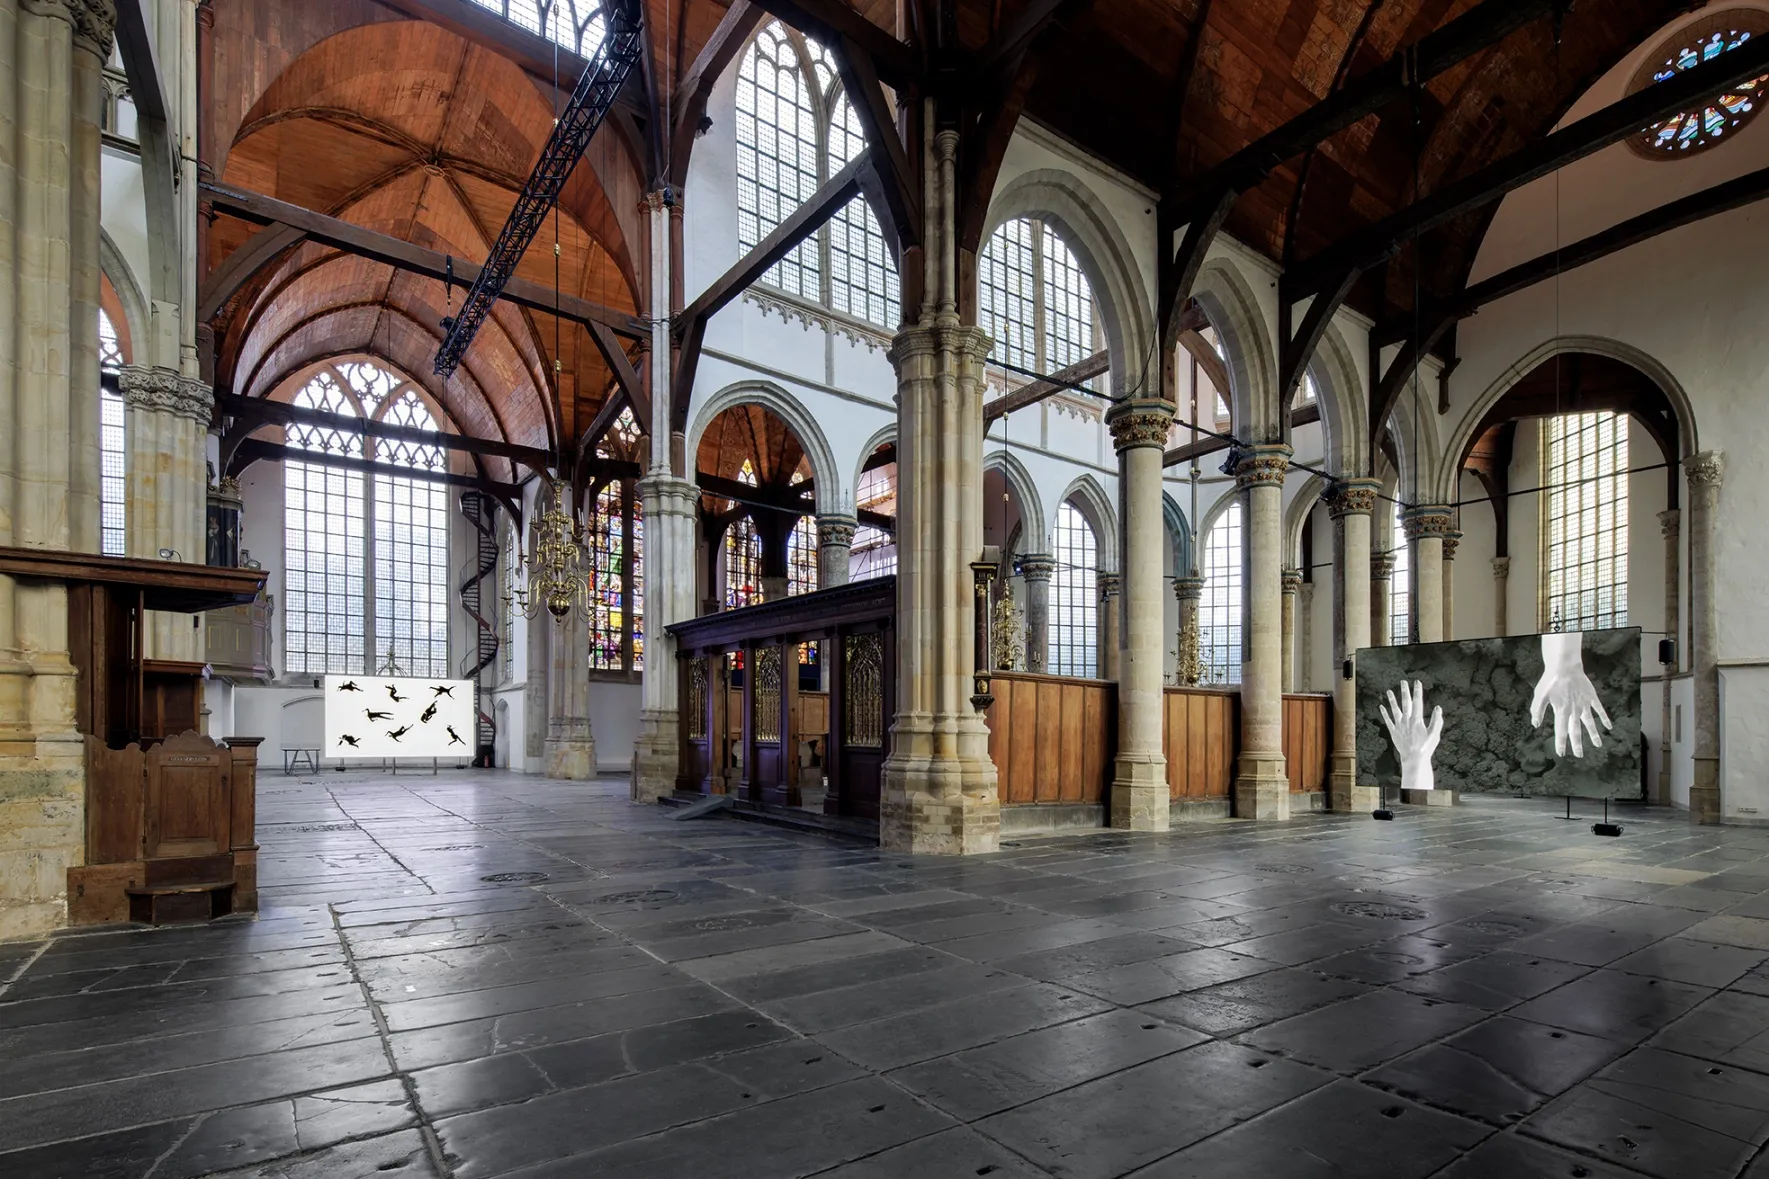 Two screens hanging in the space of the Oude Kerk